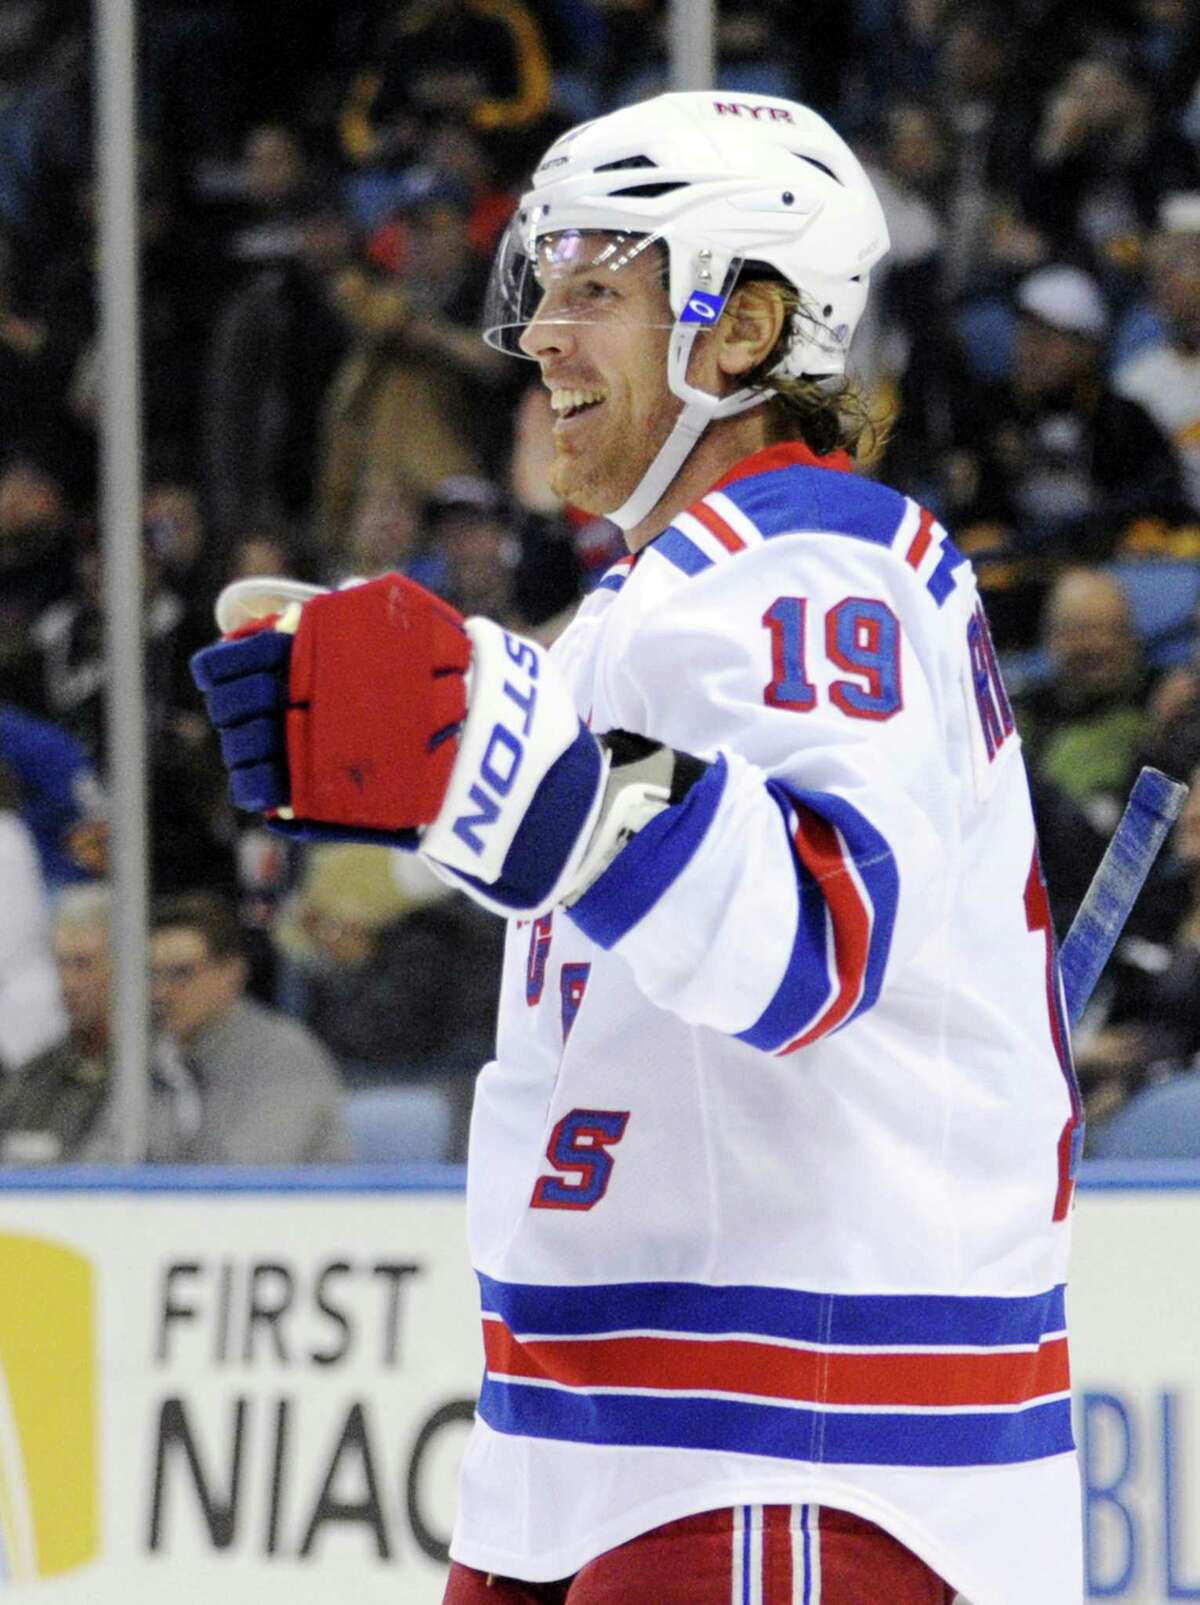 New York Rangers center Brad Richards celebrates his second of three goals against the Buffalo Sabres during the second period of an NHL hockey game in Buffalo, N.Y., Friday, April 19, 2013. New York won 8-4. (AP Photo/Gary Wiepert)